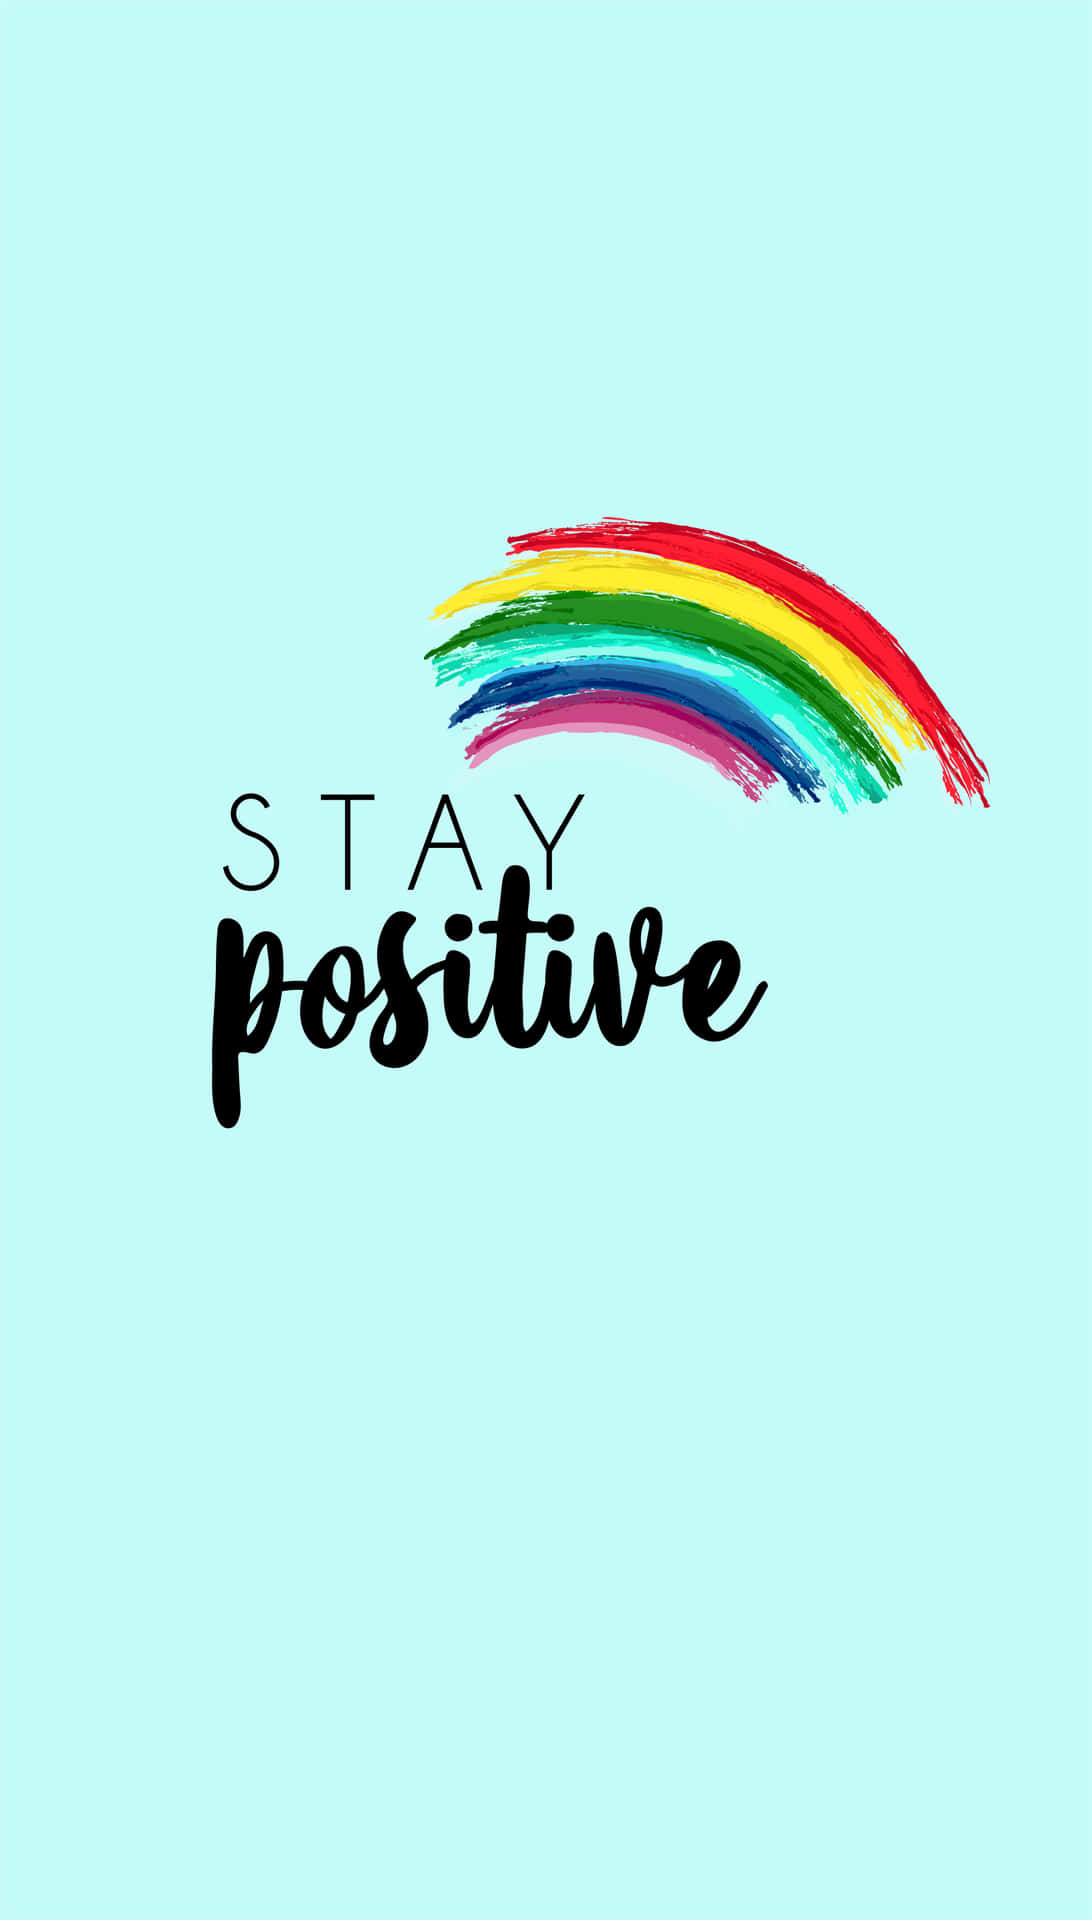 Stay Positive - A Rainbow On A Blue Background Wallpaper